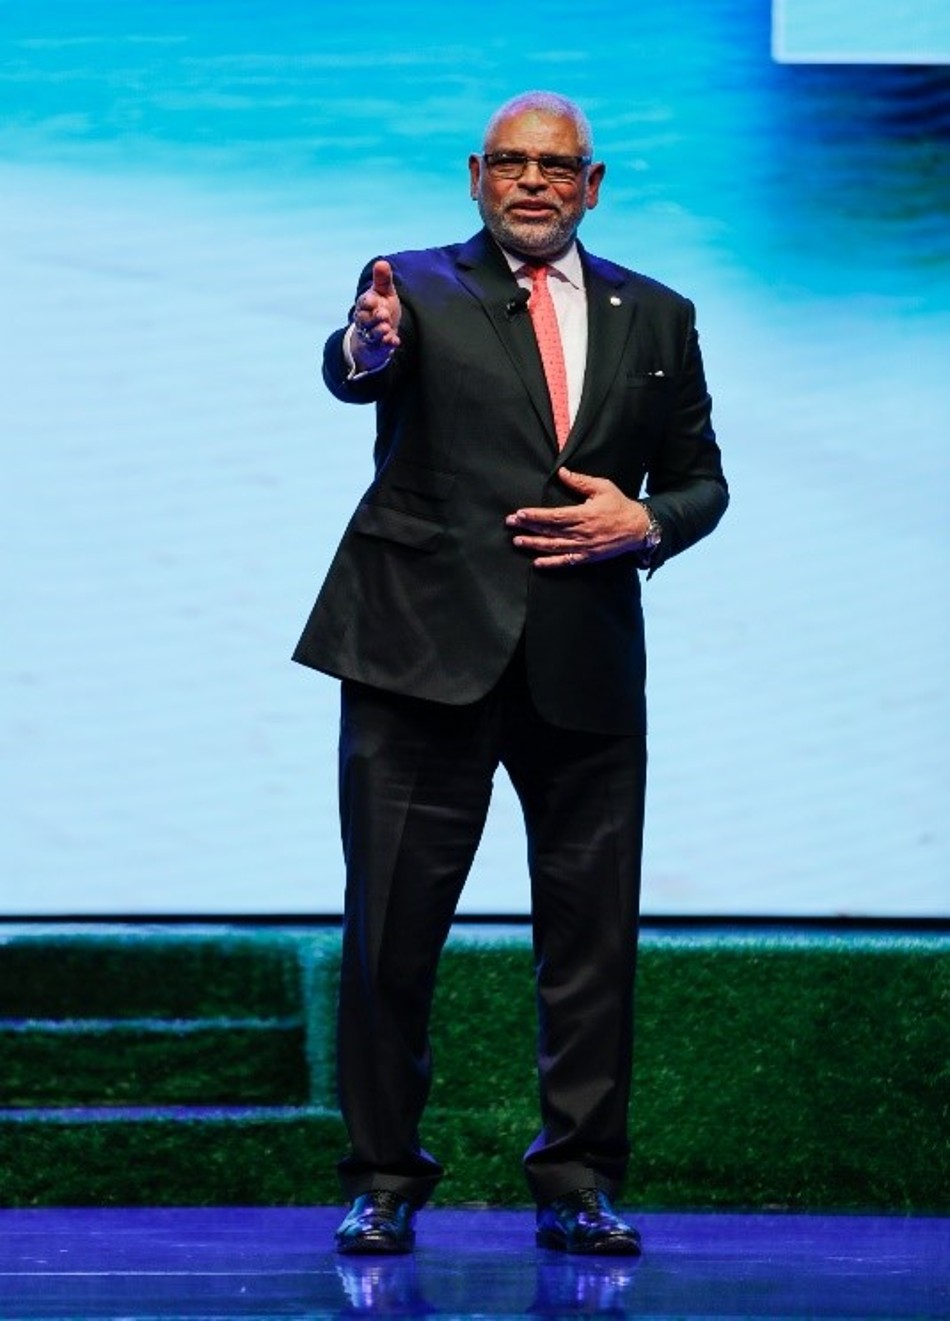 WTTC Chairman Arnold Donald giving a speech. Photo source: Tourism Promotions Board